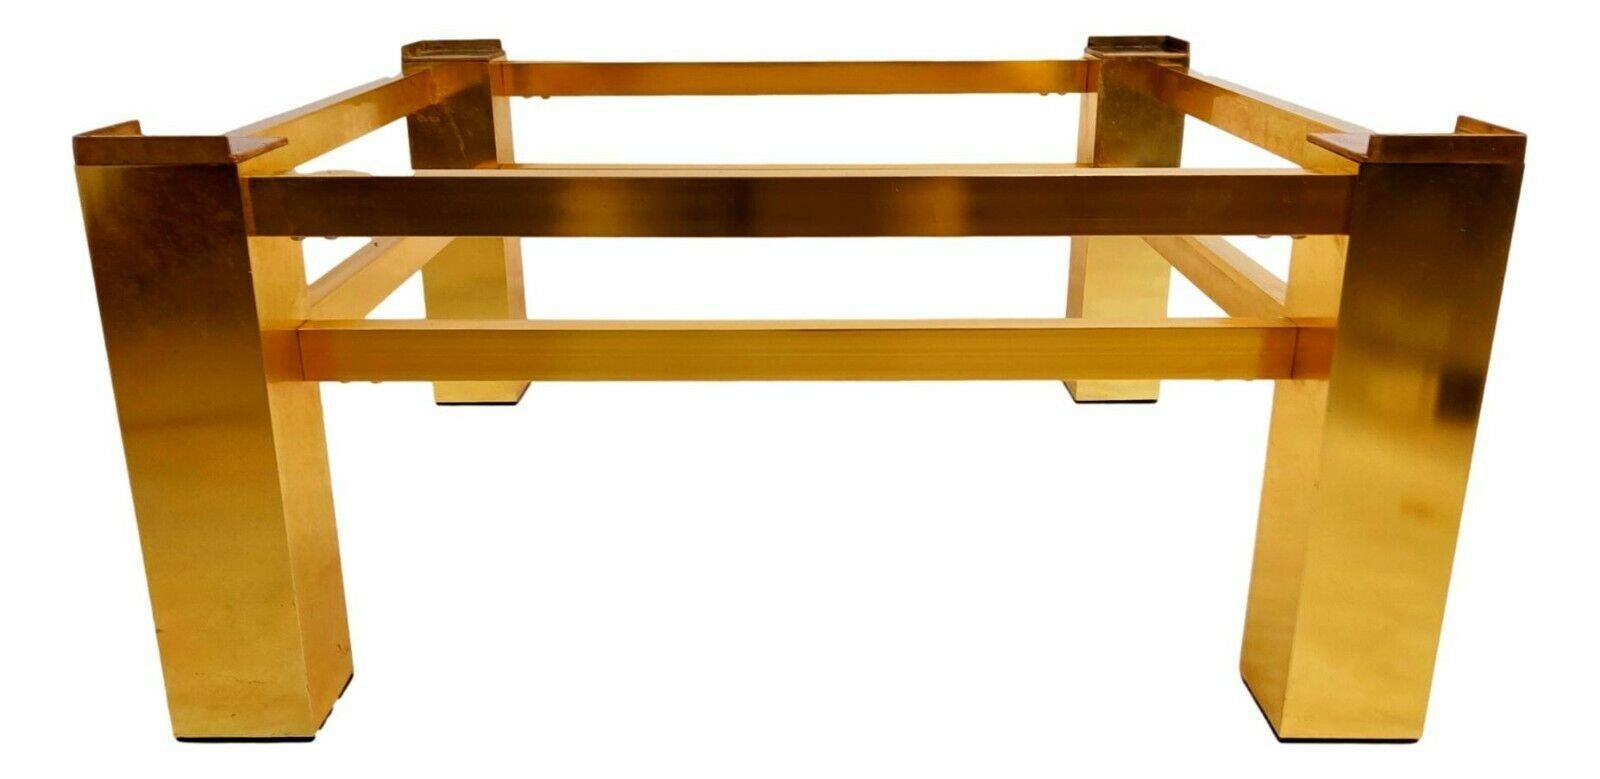 Original Gilded Aluminum Coffee Table, 1970s In Good Condition For Sale In taranto, IT